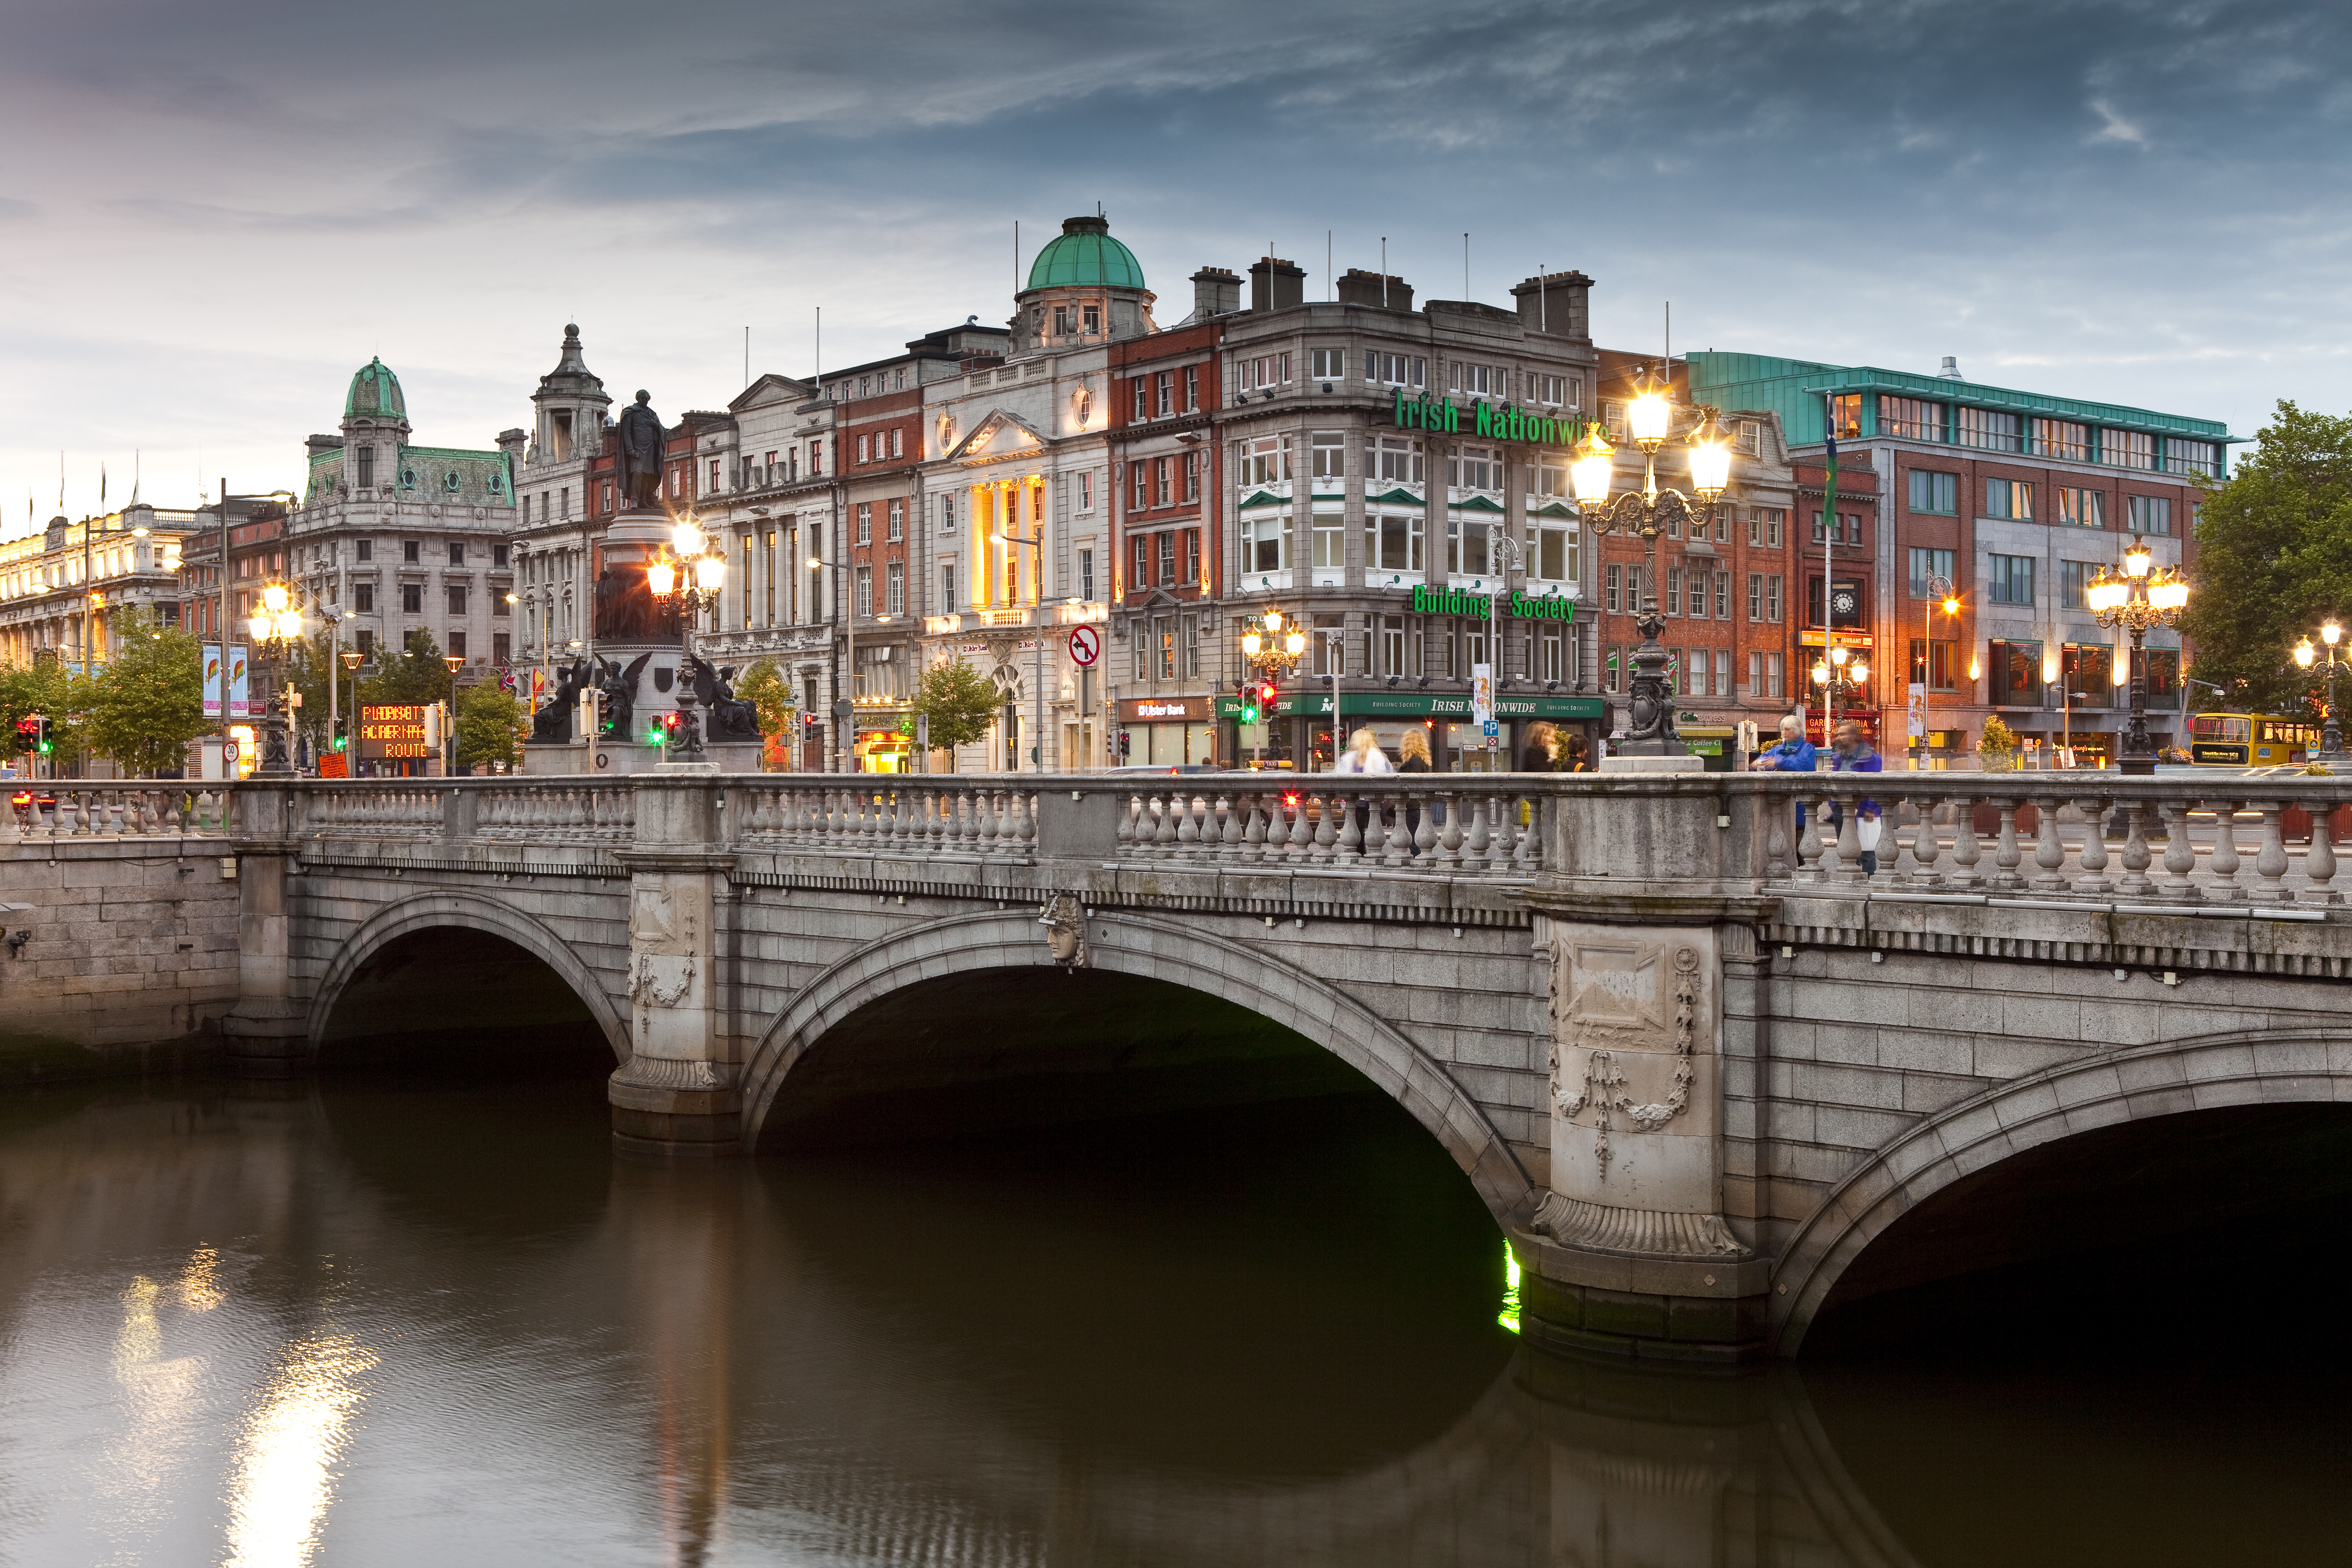 O&#x27;Connell Bridge over the River Liffey with Dublin city buildings and lights at dusk